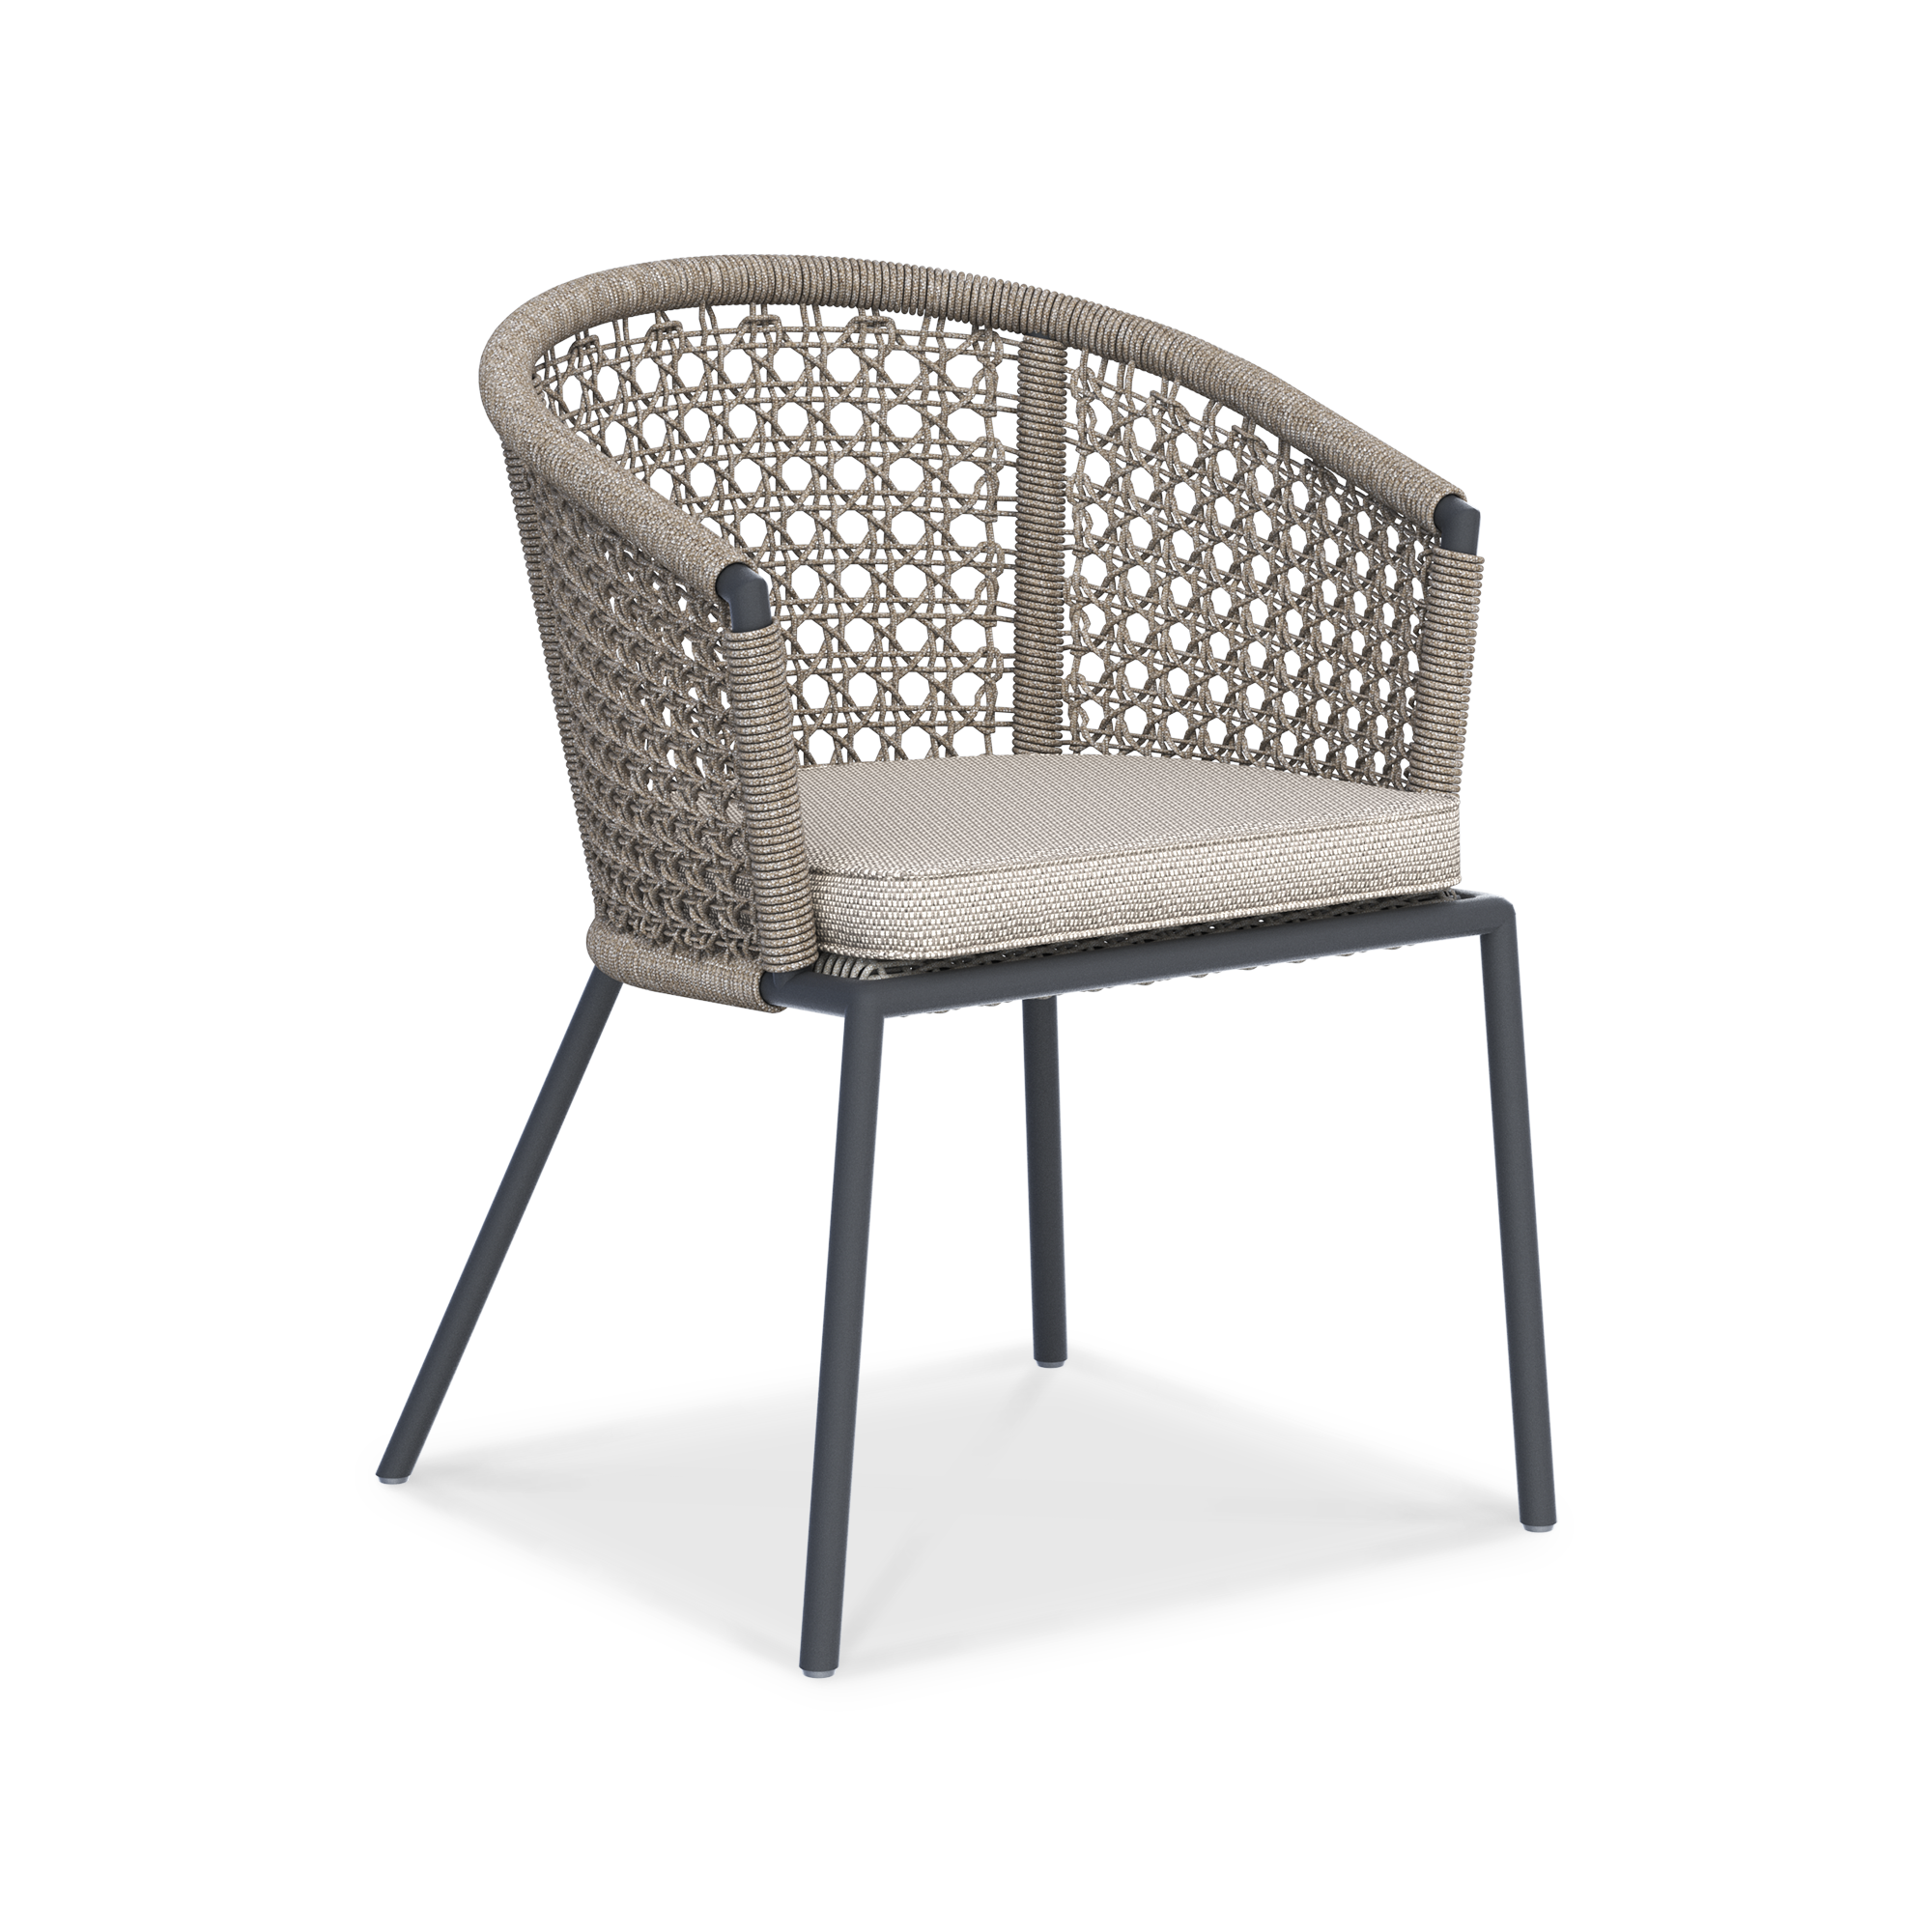 WINA DINING ROUND CHAIR PERS